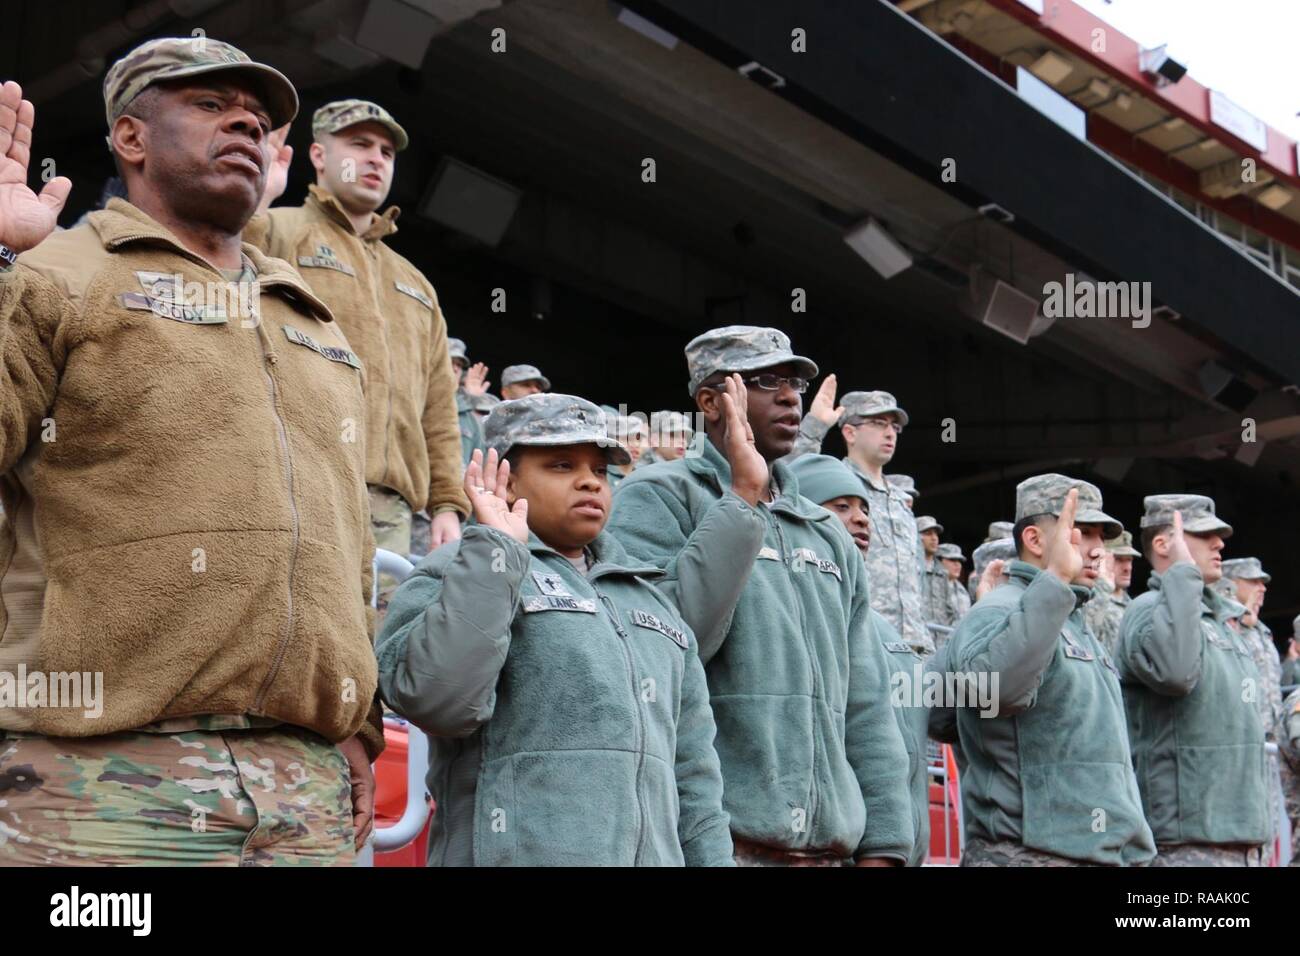 National Guard soldiers and airmen swear in as District of Columbia special police at FedEx Field in Landover, Md., Jan. 19, 2017. The National Guard members are here in preparation of the 58th Presidential Inauguration. During the historic event, National Guard troops from almost every state and territory will provide several critical functions including crowd management, traffic control, emergency services, logistics, and ceremonial marching elements. Stock Photo